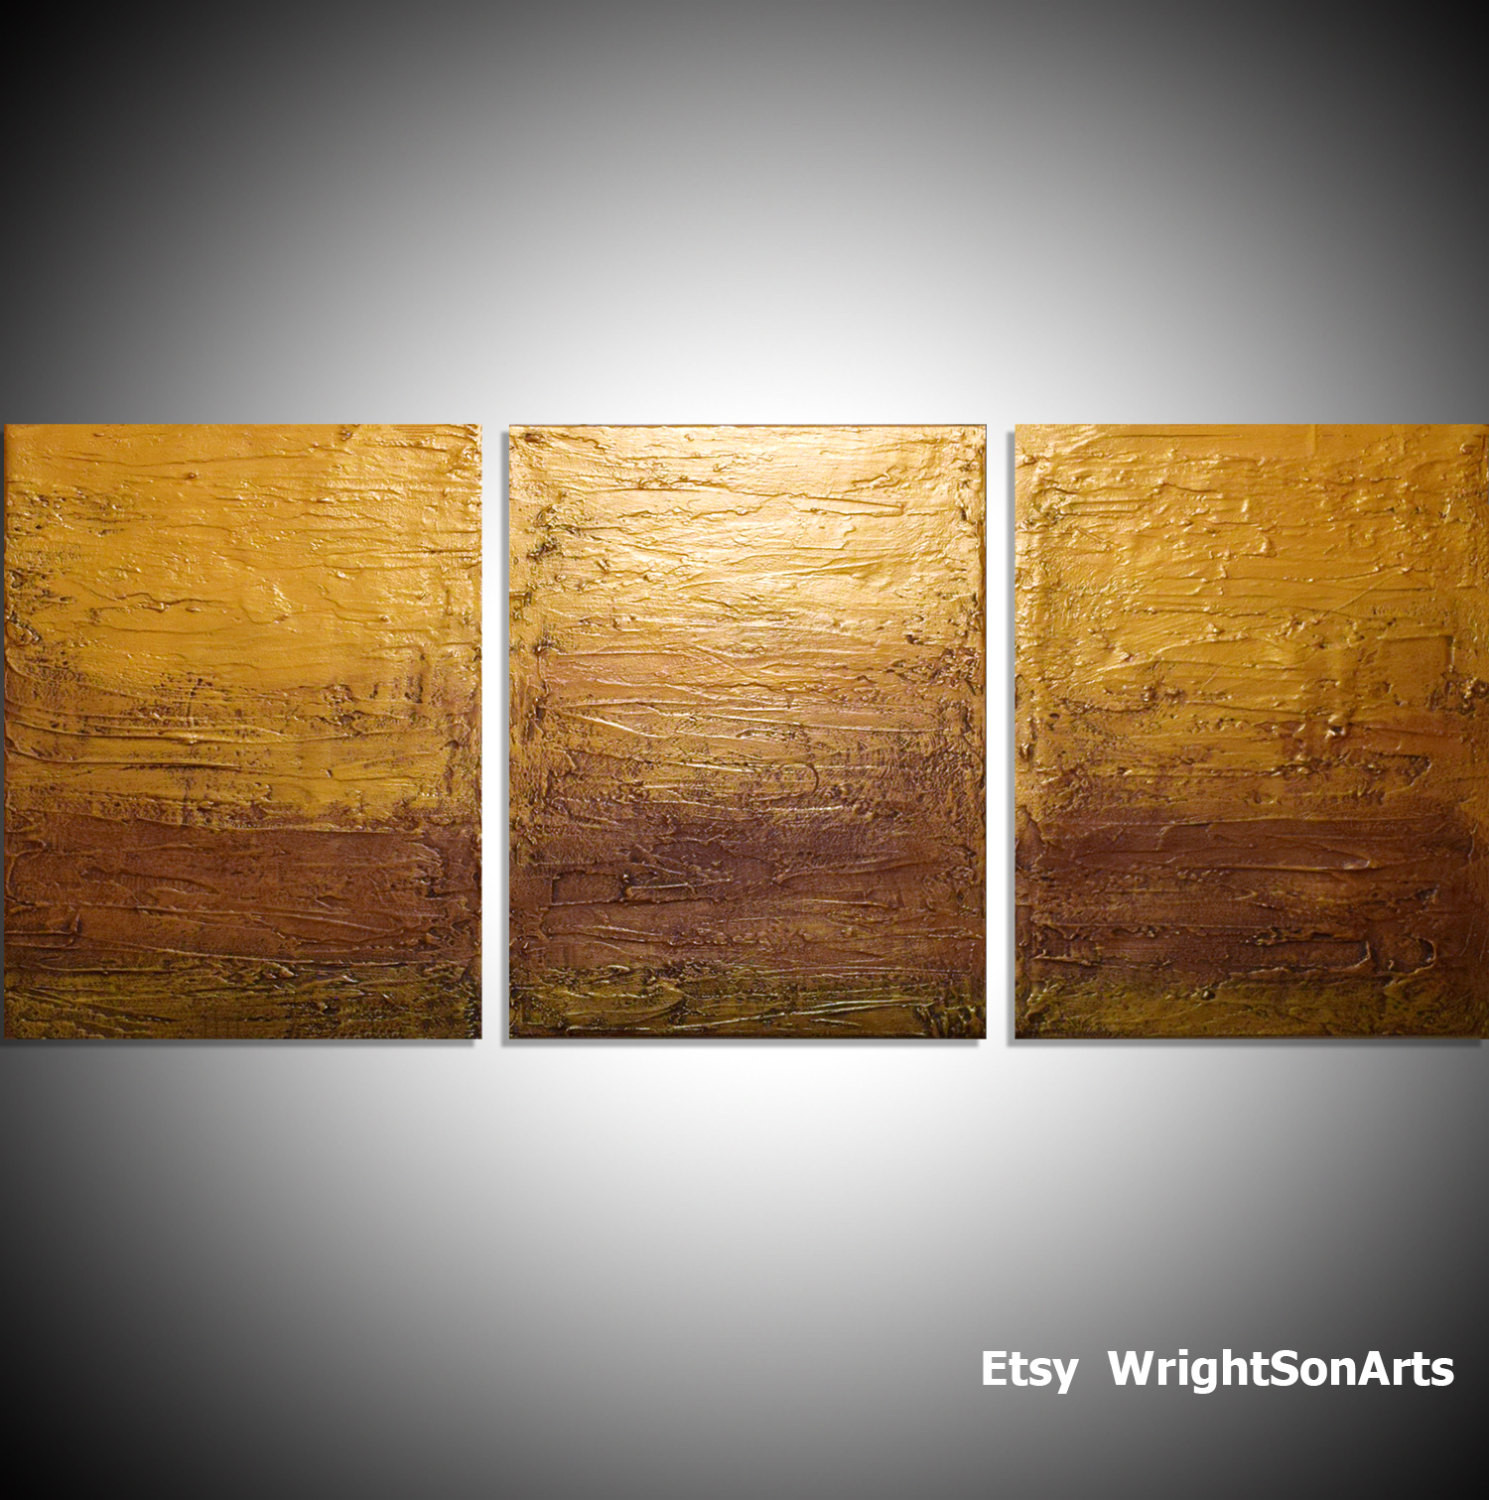 Best ideas about Triptych Wall Art . Save or Pin LARGE WALL ART triptych 3 panel wall contemporary art Now.